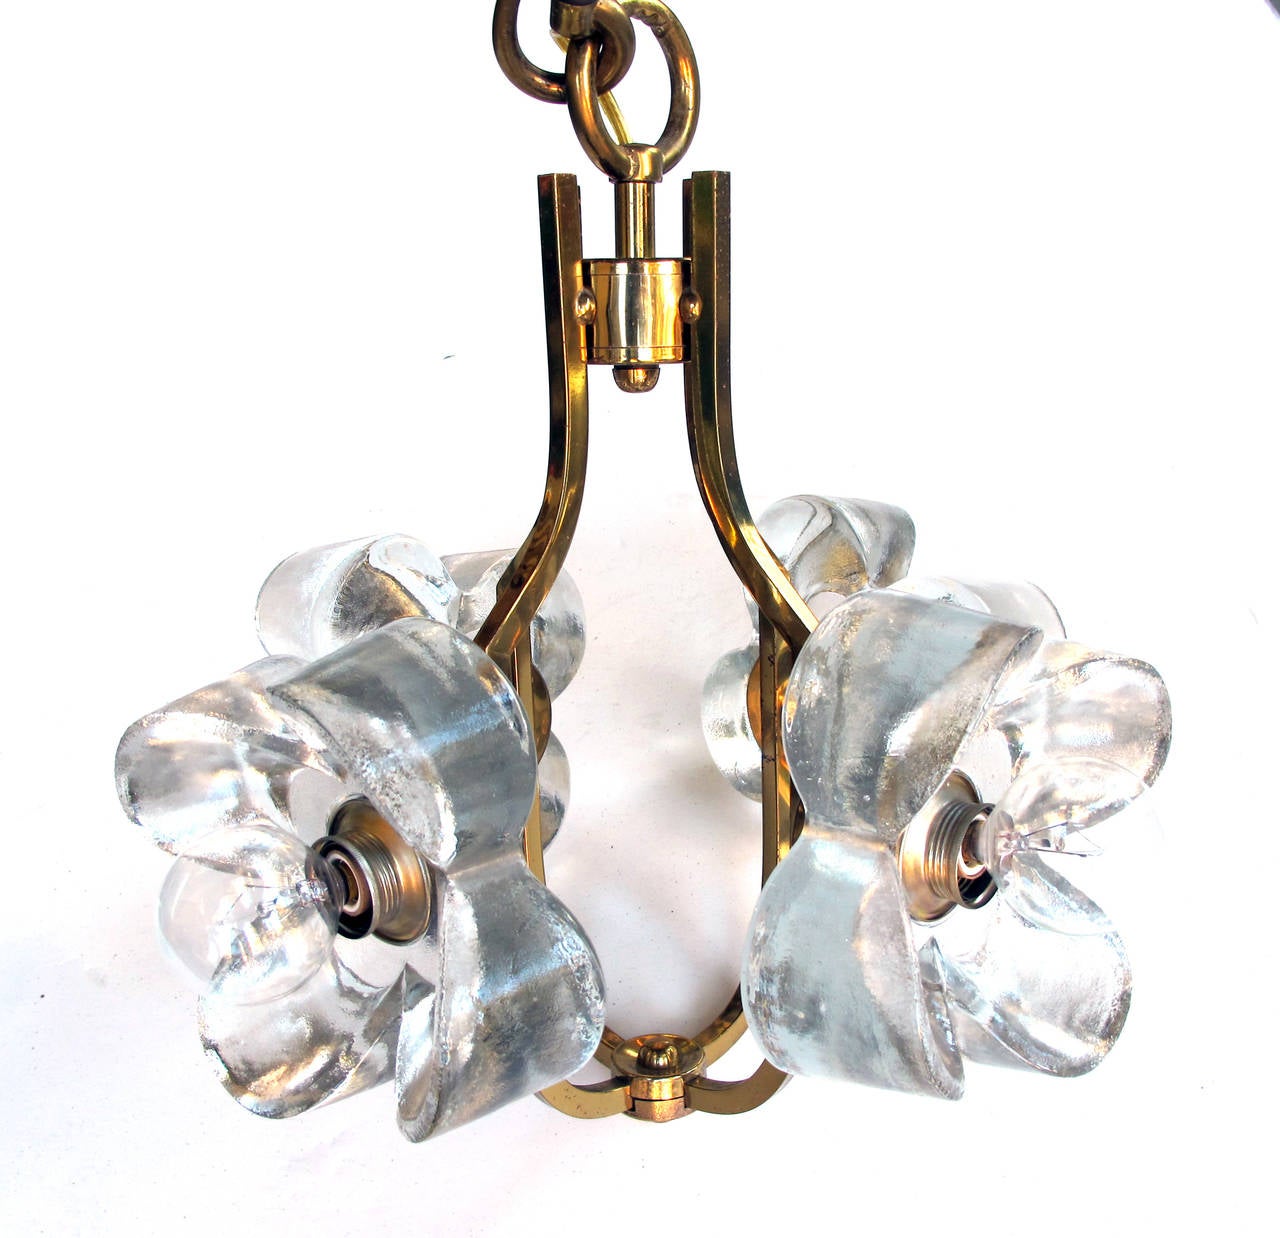 A whimsical Italian 1960s brass four-light chandelier or pendant with thickly molded glass flowers; all suspended by a separate brass rod; by AV Mazzega; the cage-form brass frame adorned with four robust glass flower heads.